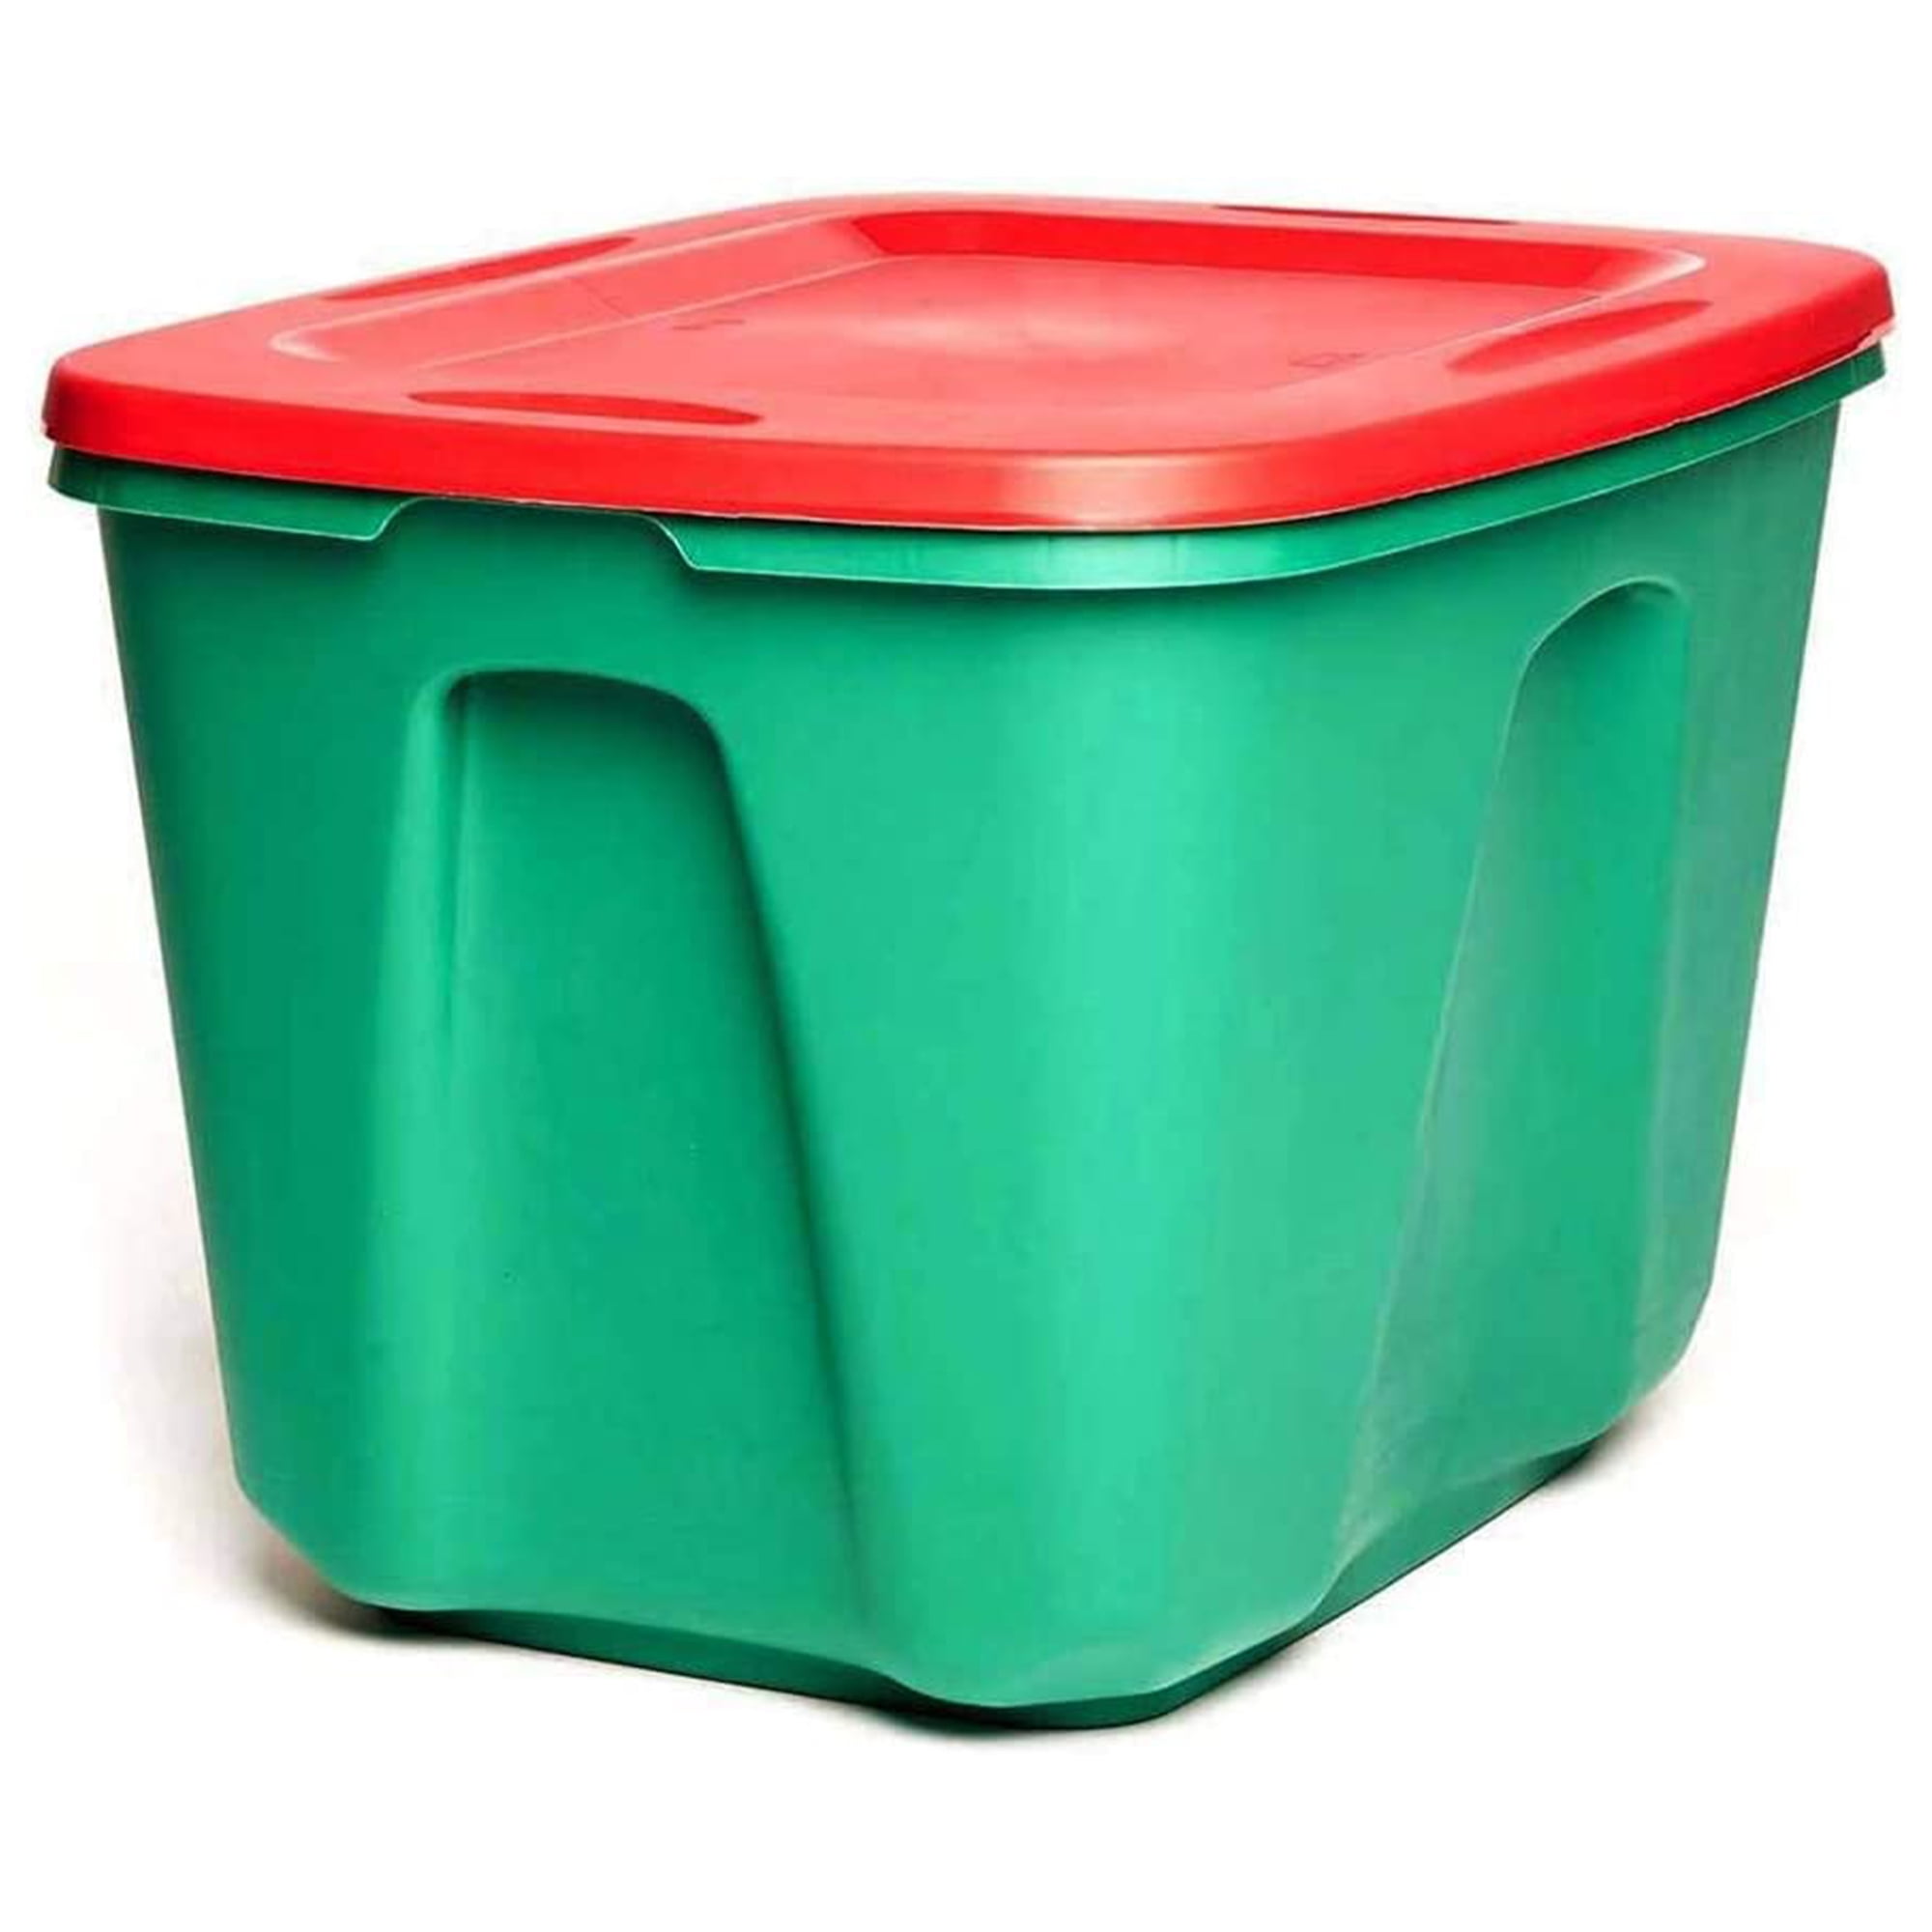 HOMZ 18 Gallon Heavy Duty Plastic Storage Container, Green/Red (4 Pack)